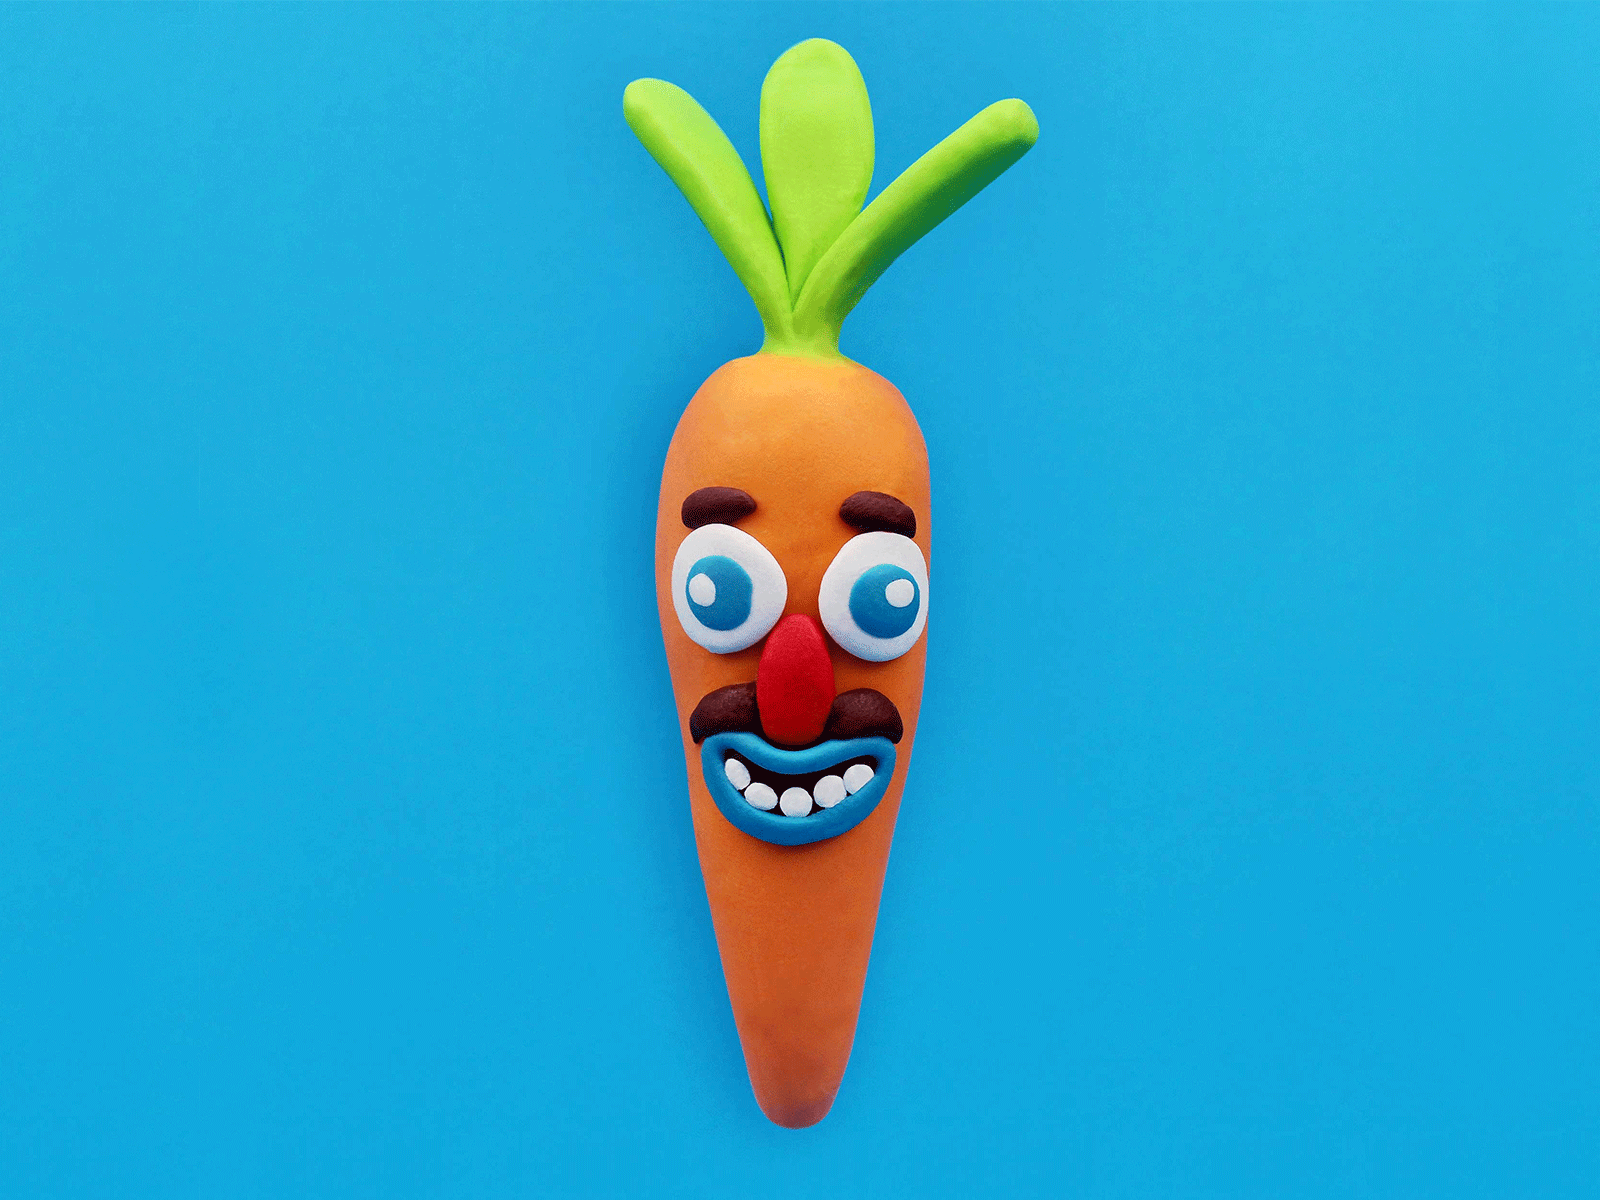 Mr. Carrot by Kaitlyn on Dribbble